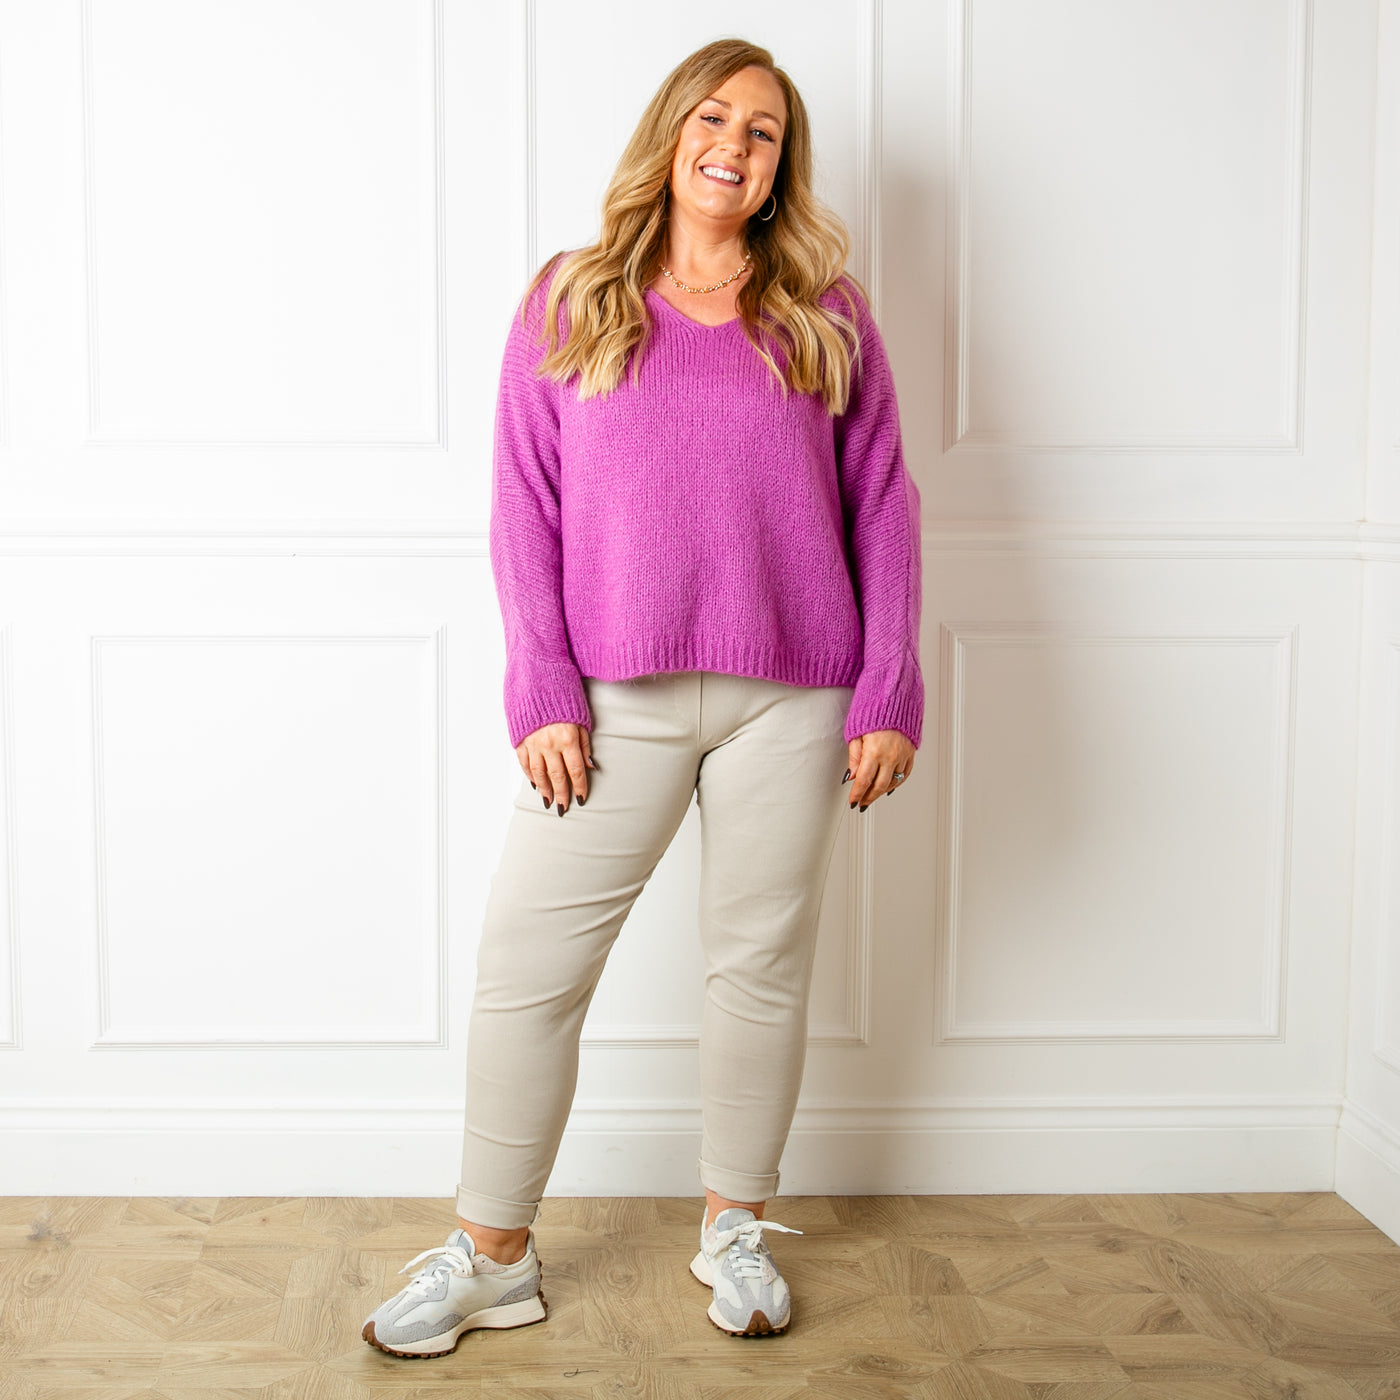 The plum purple Mohair V Neck Jumper, our bestselling jumper, which is great for layering